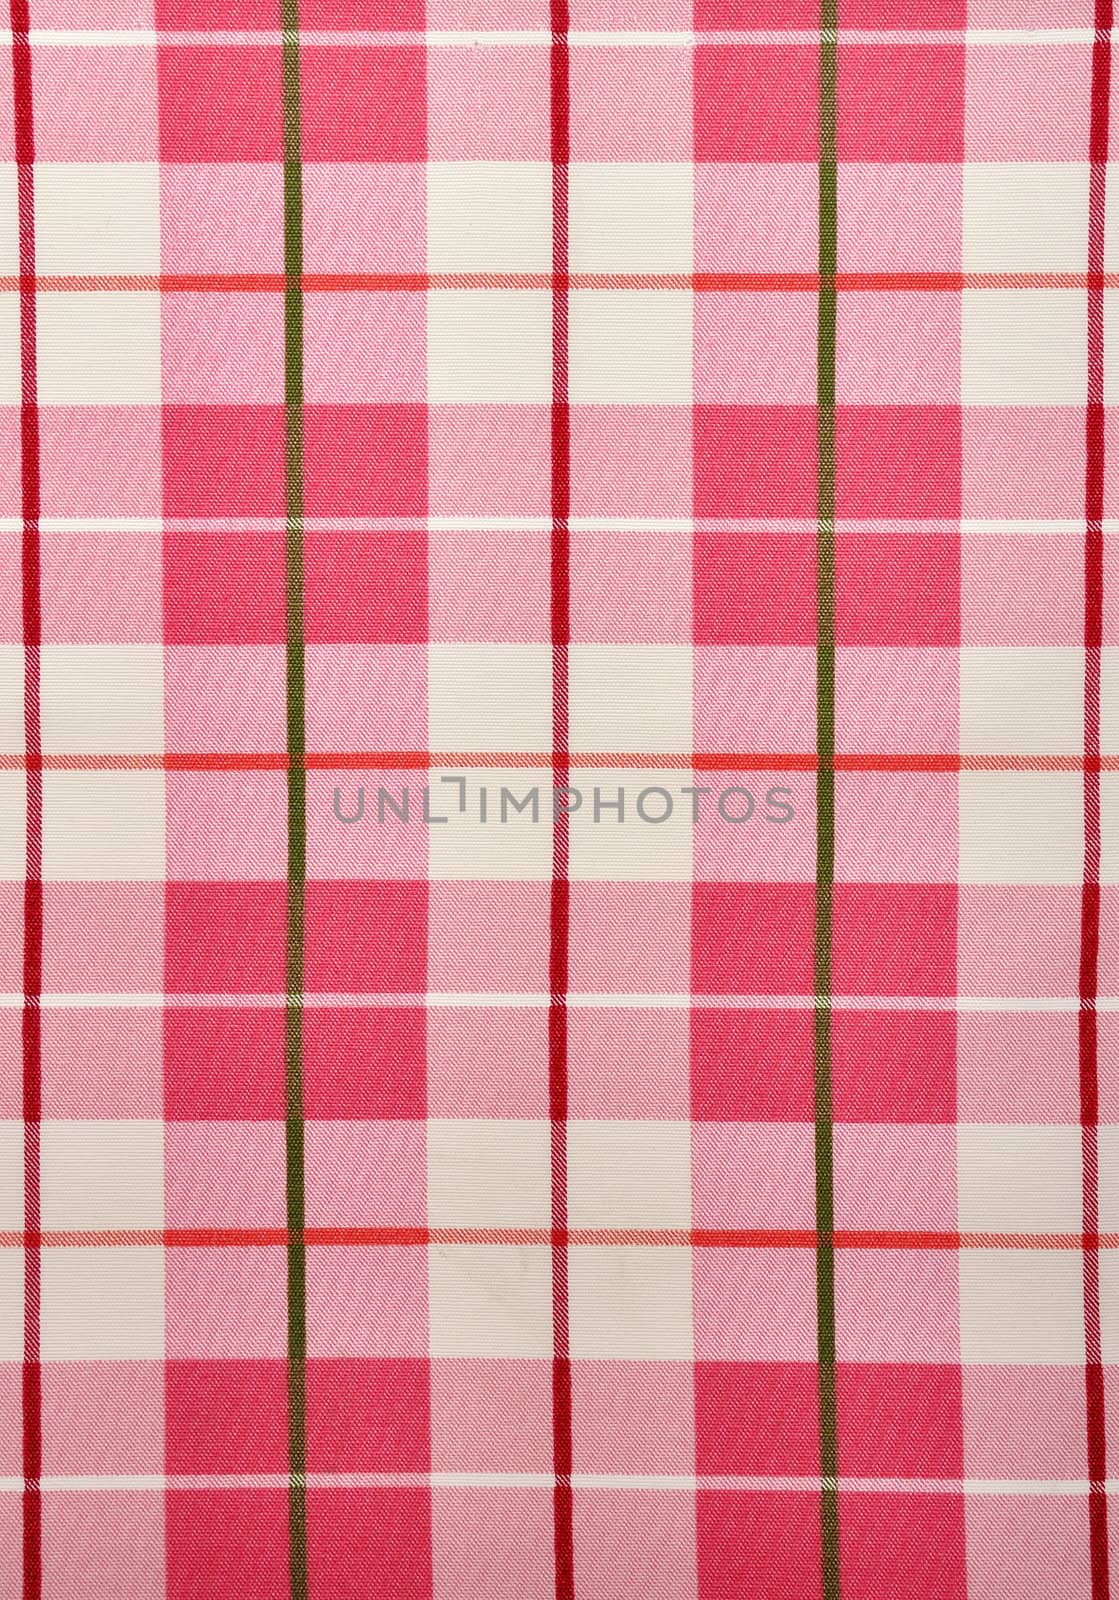 Red and white checked pattern